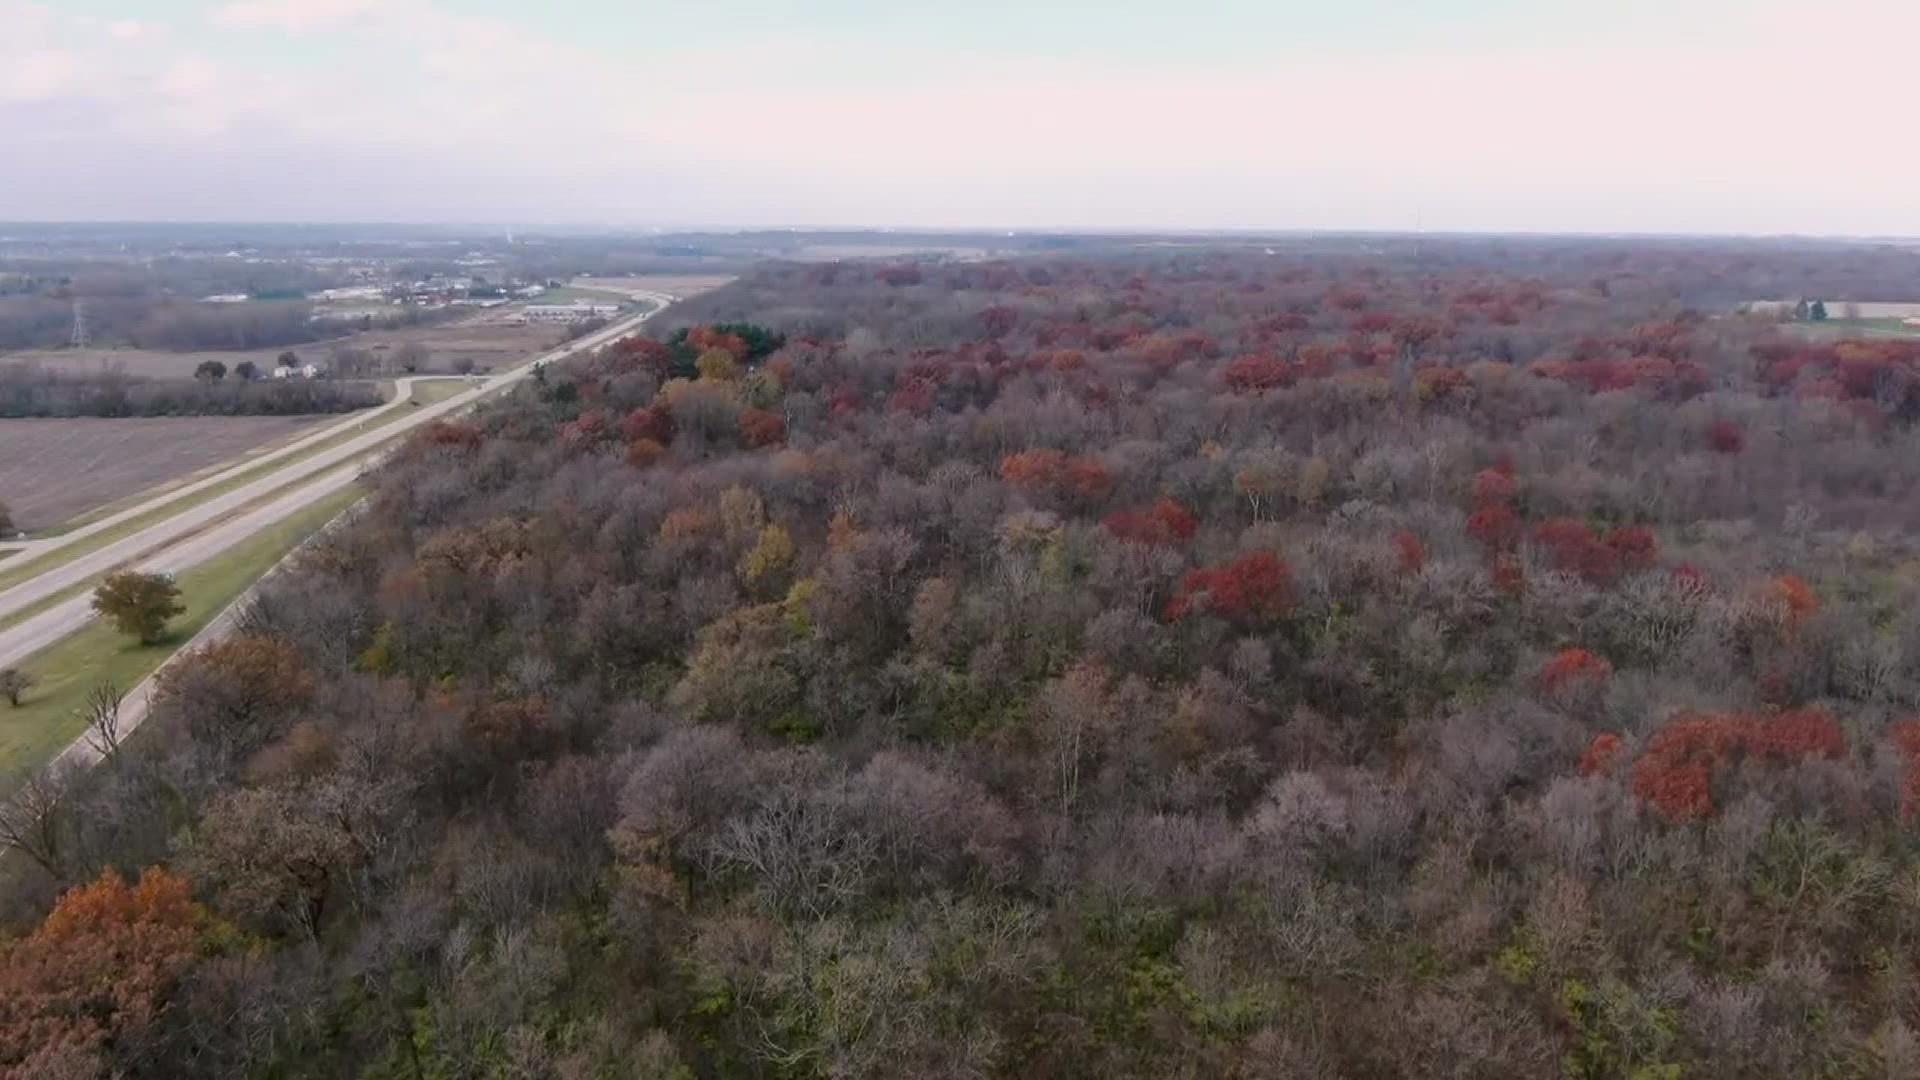 The Rock Island County Forest Preserve challenged the public come up with names for the new park near Interstate 80 and Illinois 92.